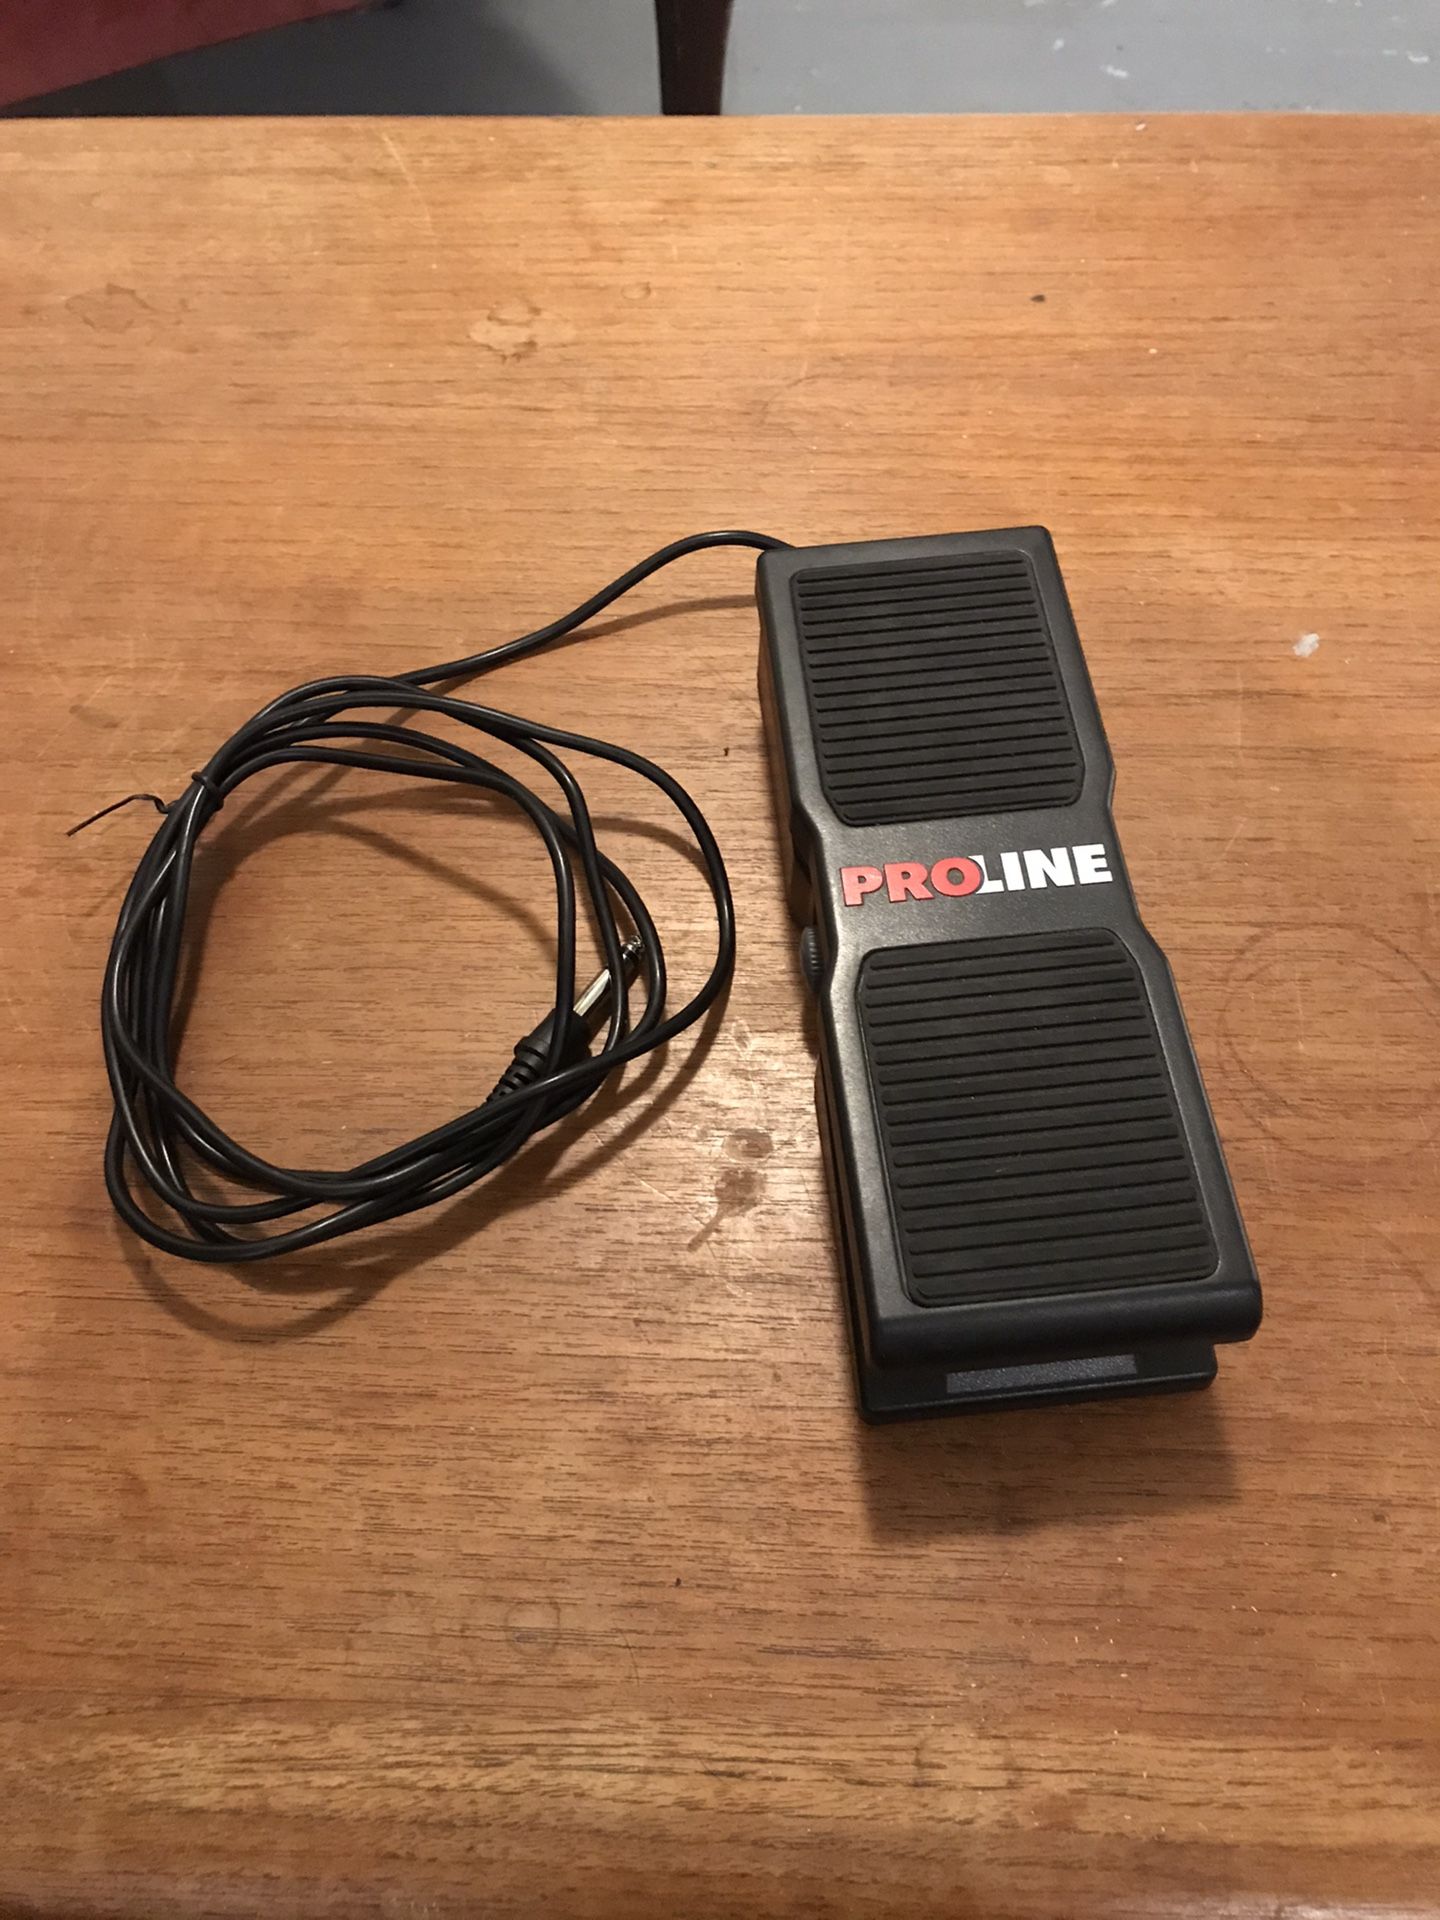 Variable Proline keybard / Expression Pedal